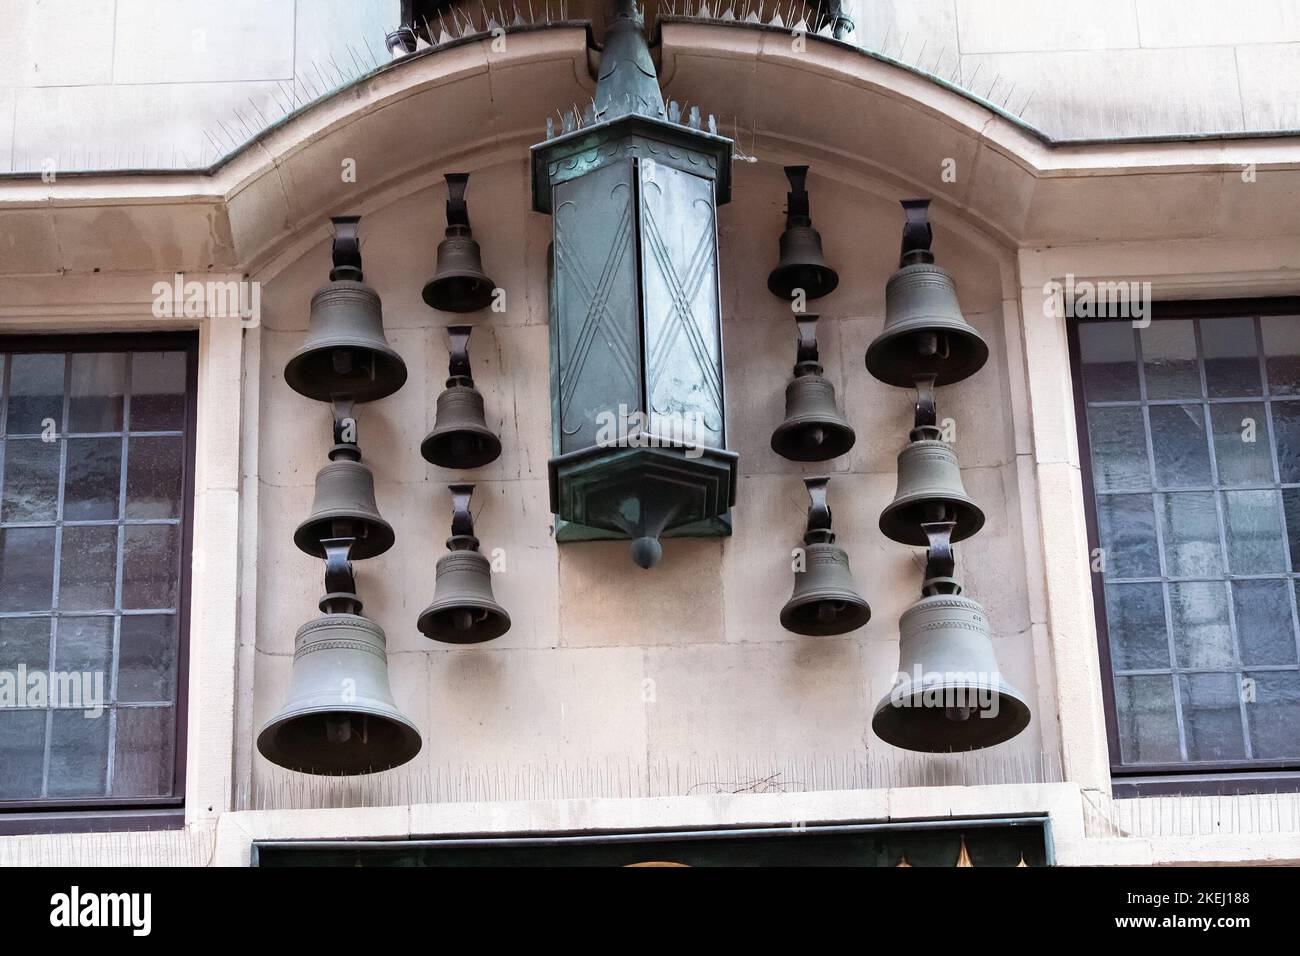 25 July 2022, Munster, Germany: Row of chimes of the World time Clock on the street of old european city Stock Photo